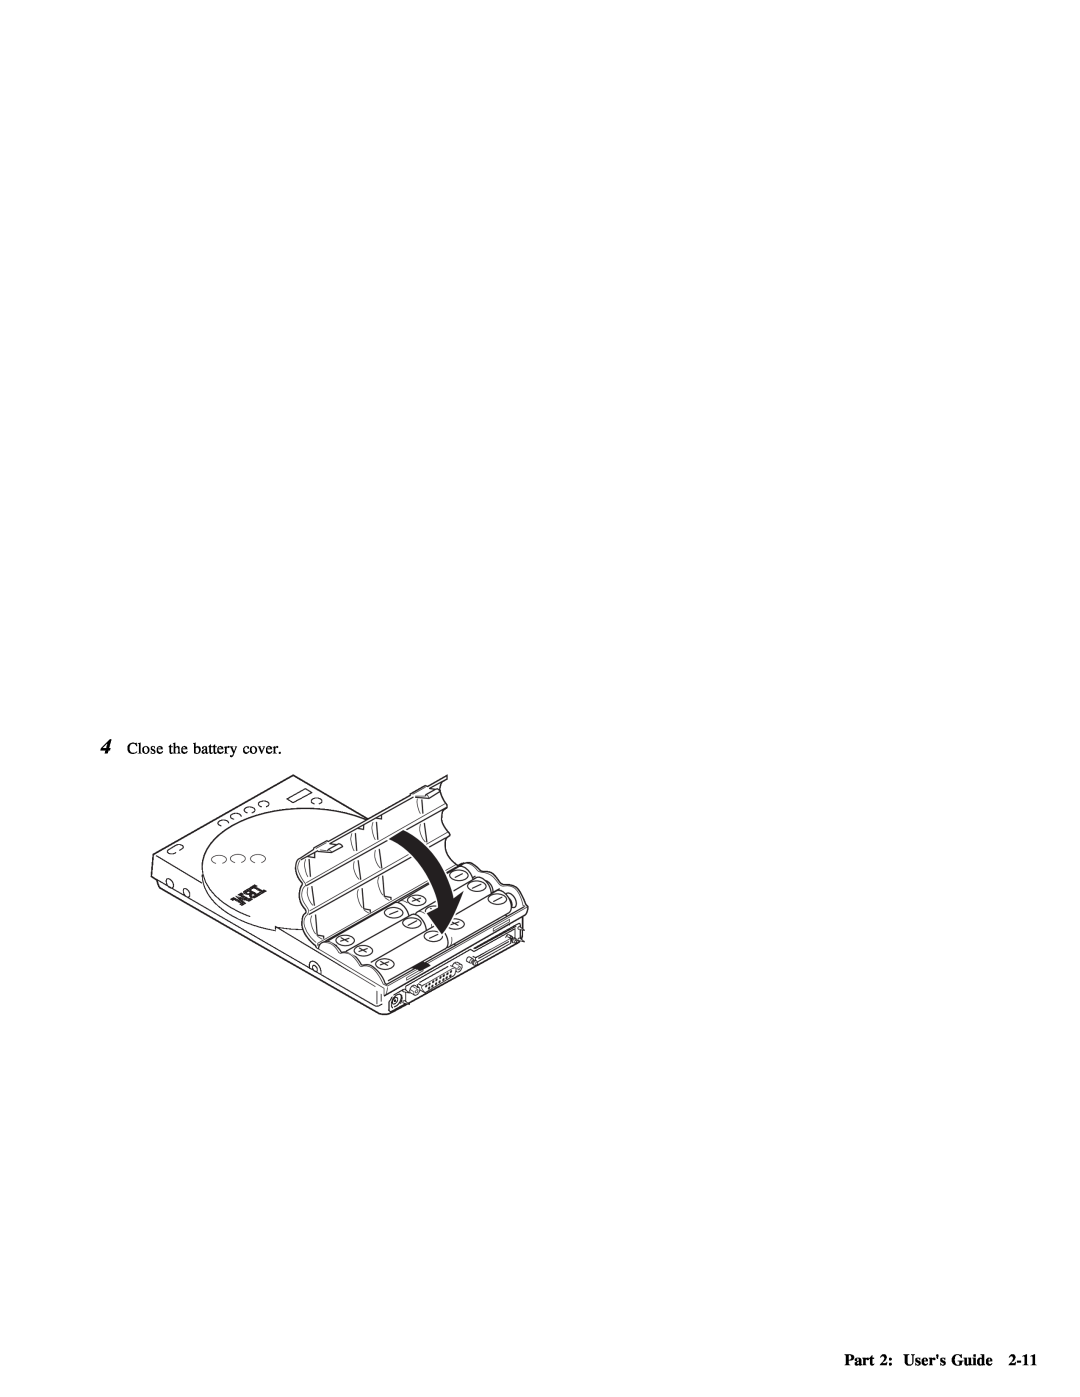 Lenovo 4304493 manual 2-11, Close the battery cover, Part 2 Users Guide 